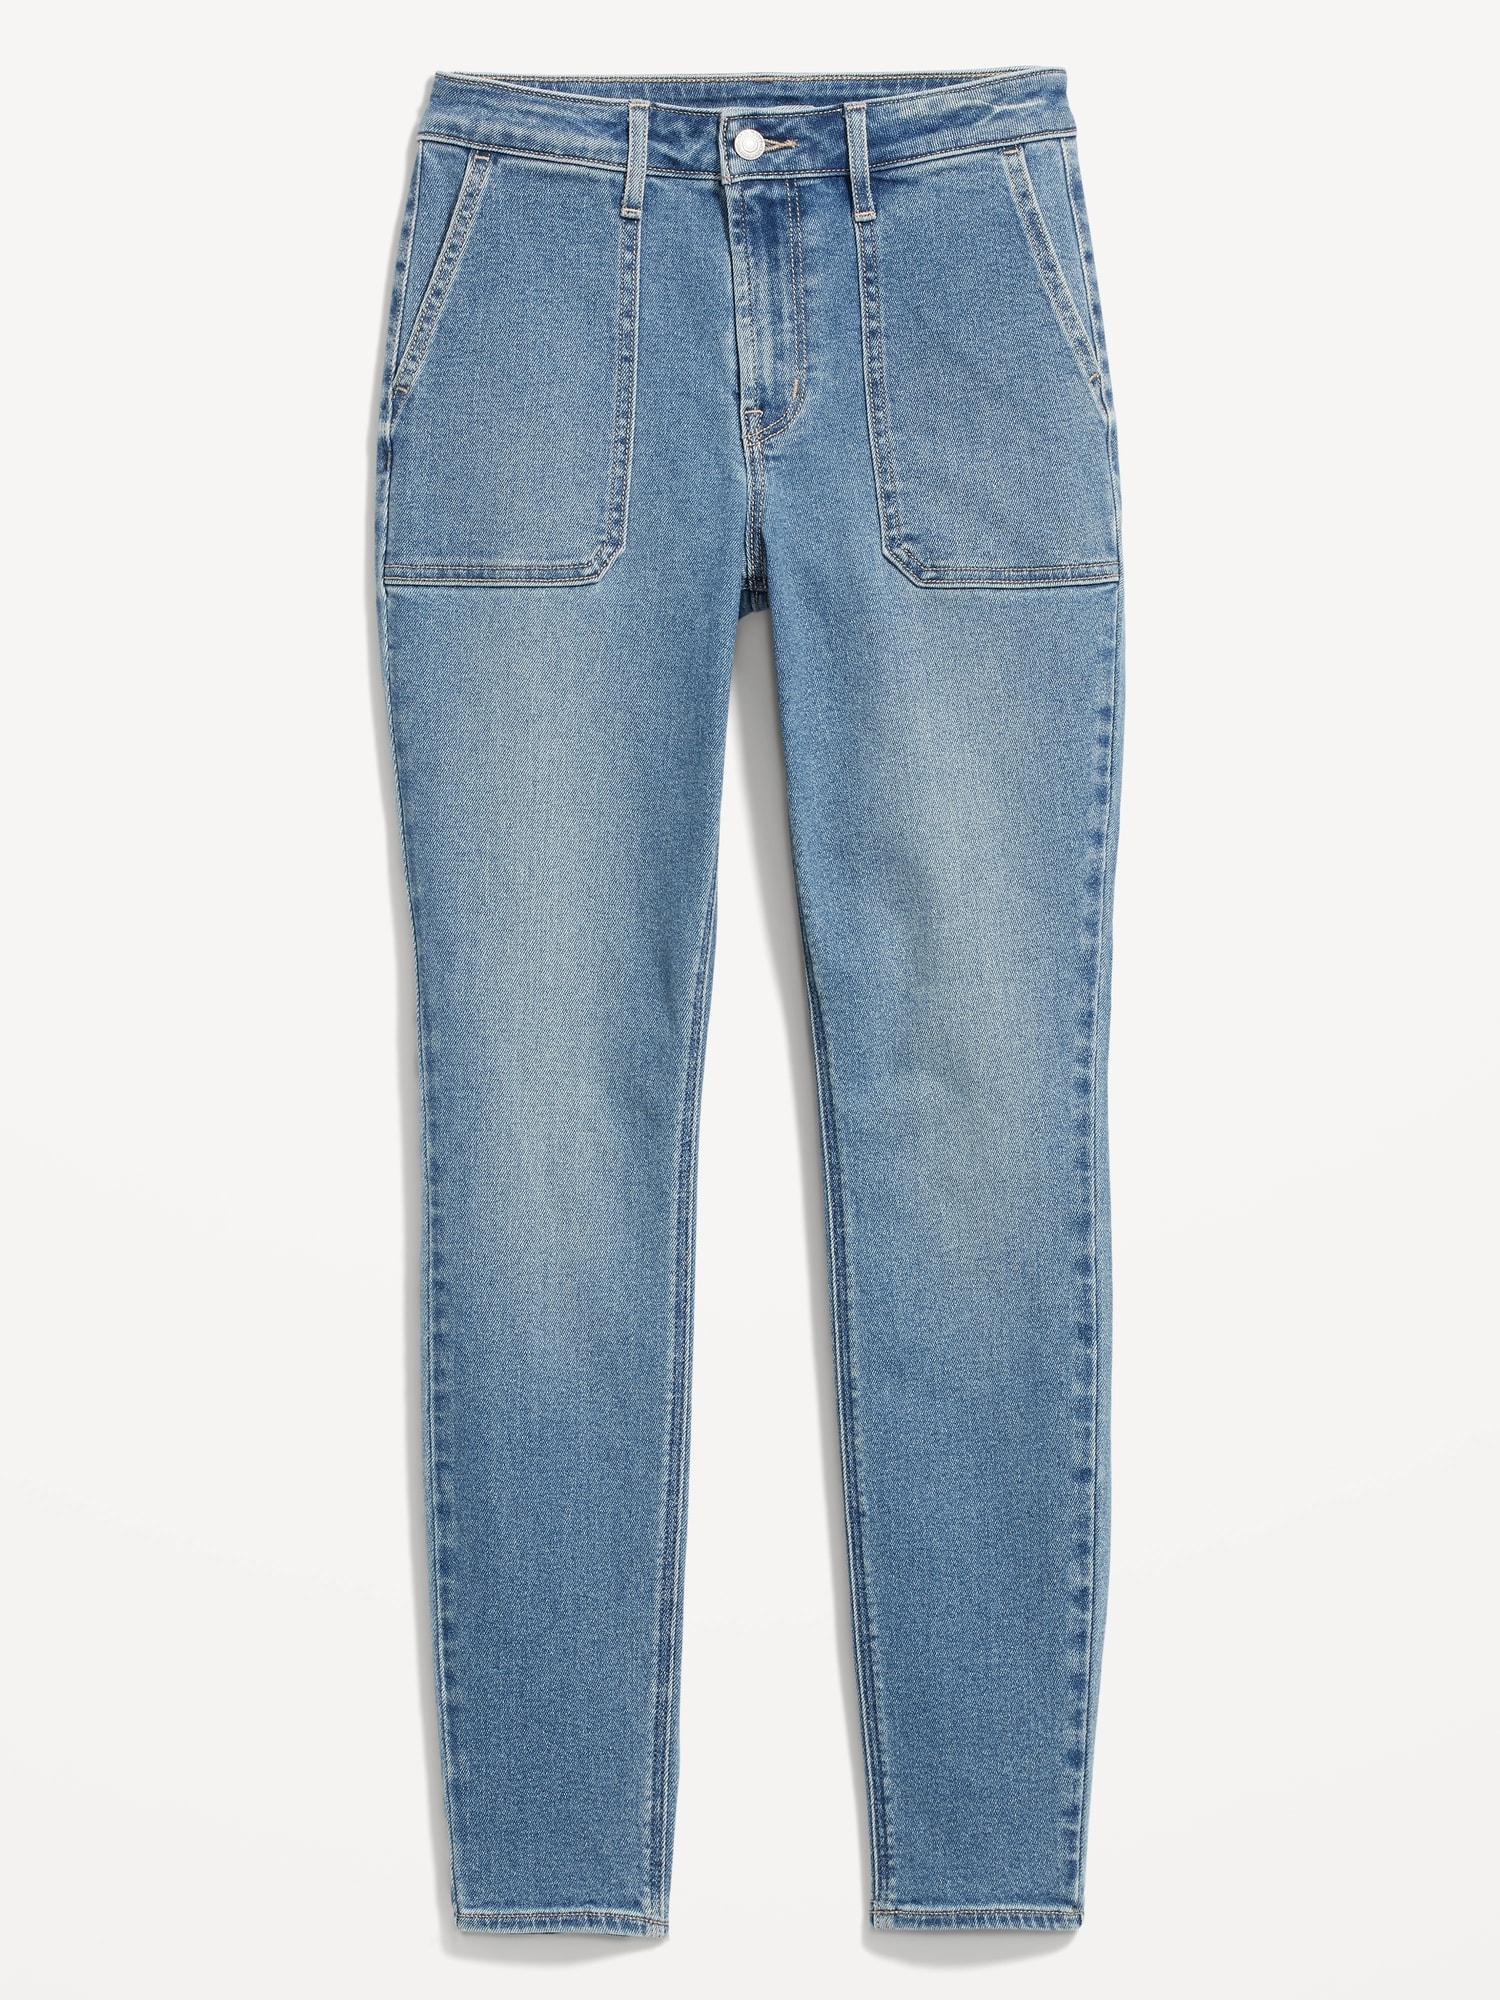 High-Waisted Rockstar Super-Skinny Utility Jeans for Women